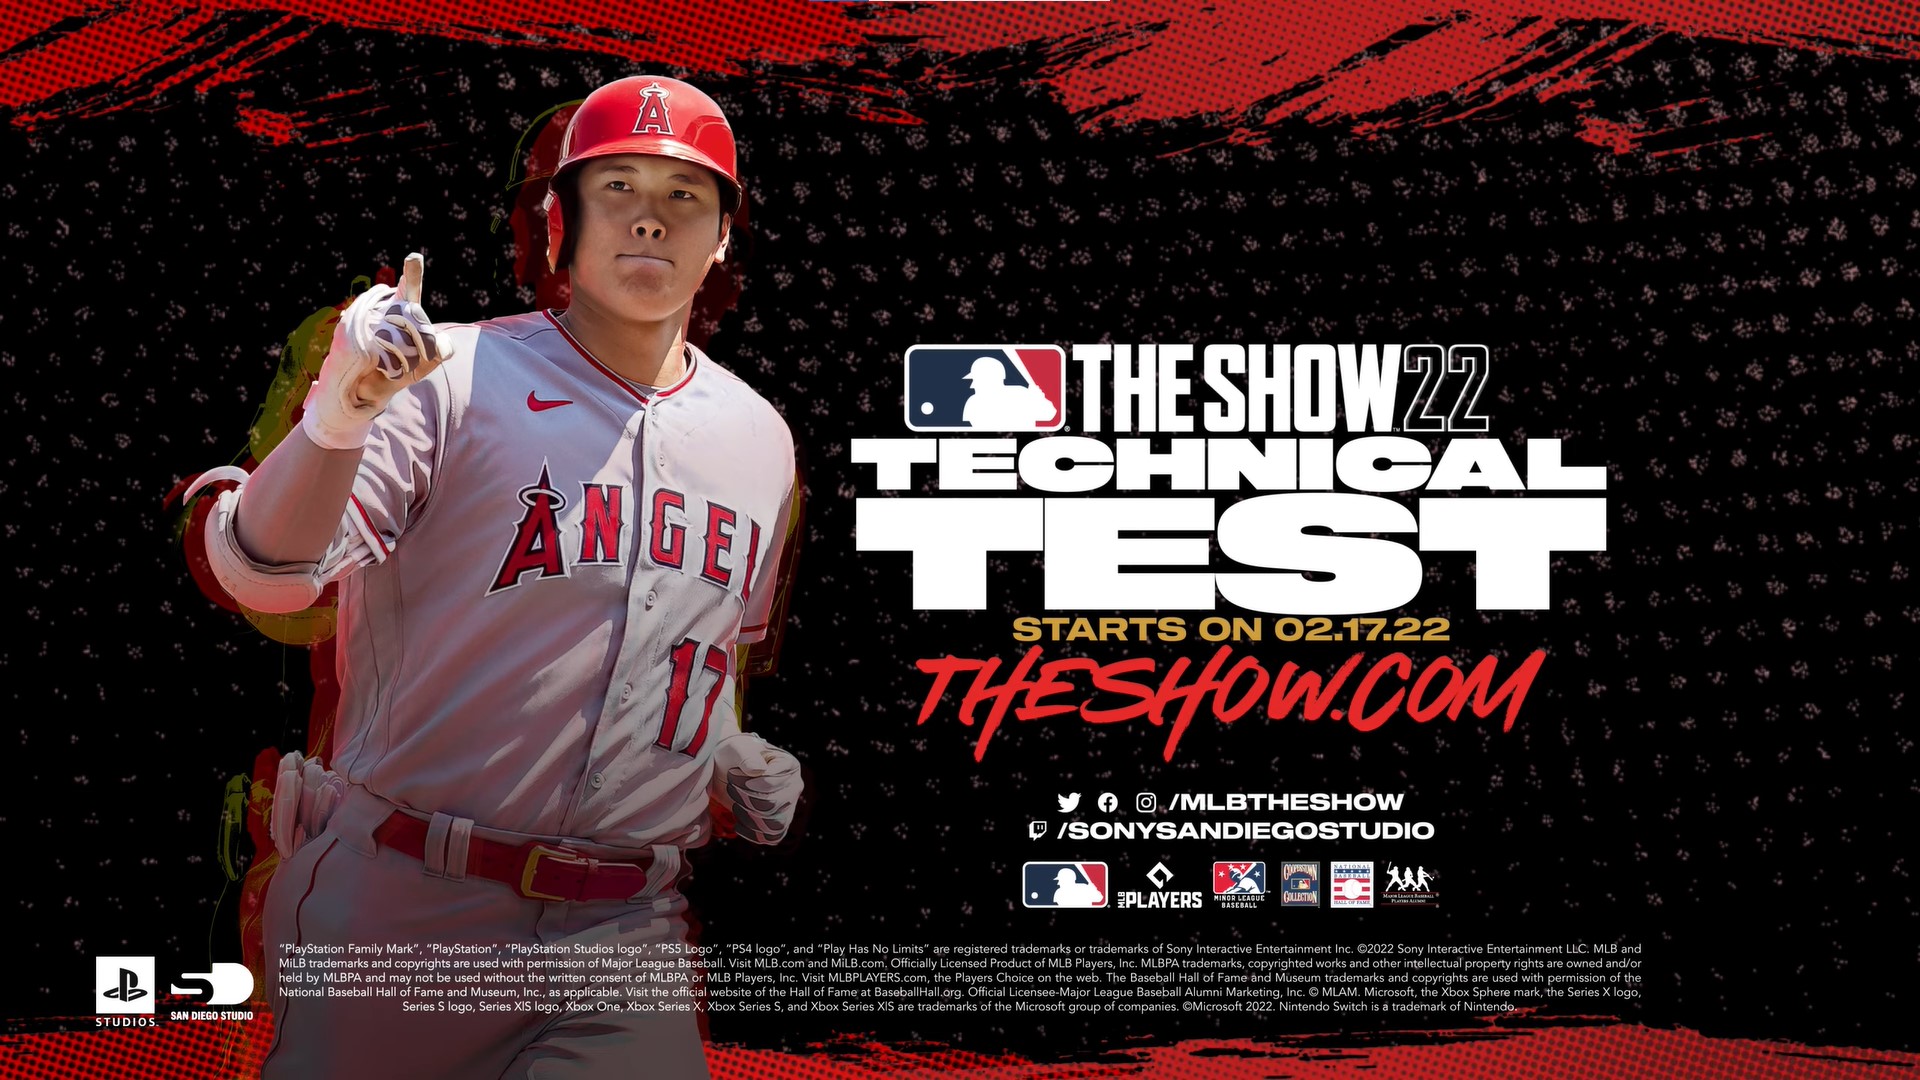 MLB The Show 22 Tech Test announced for February 17